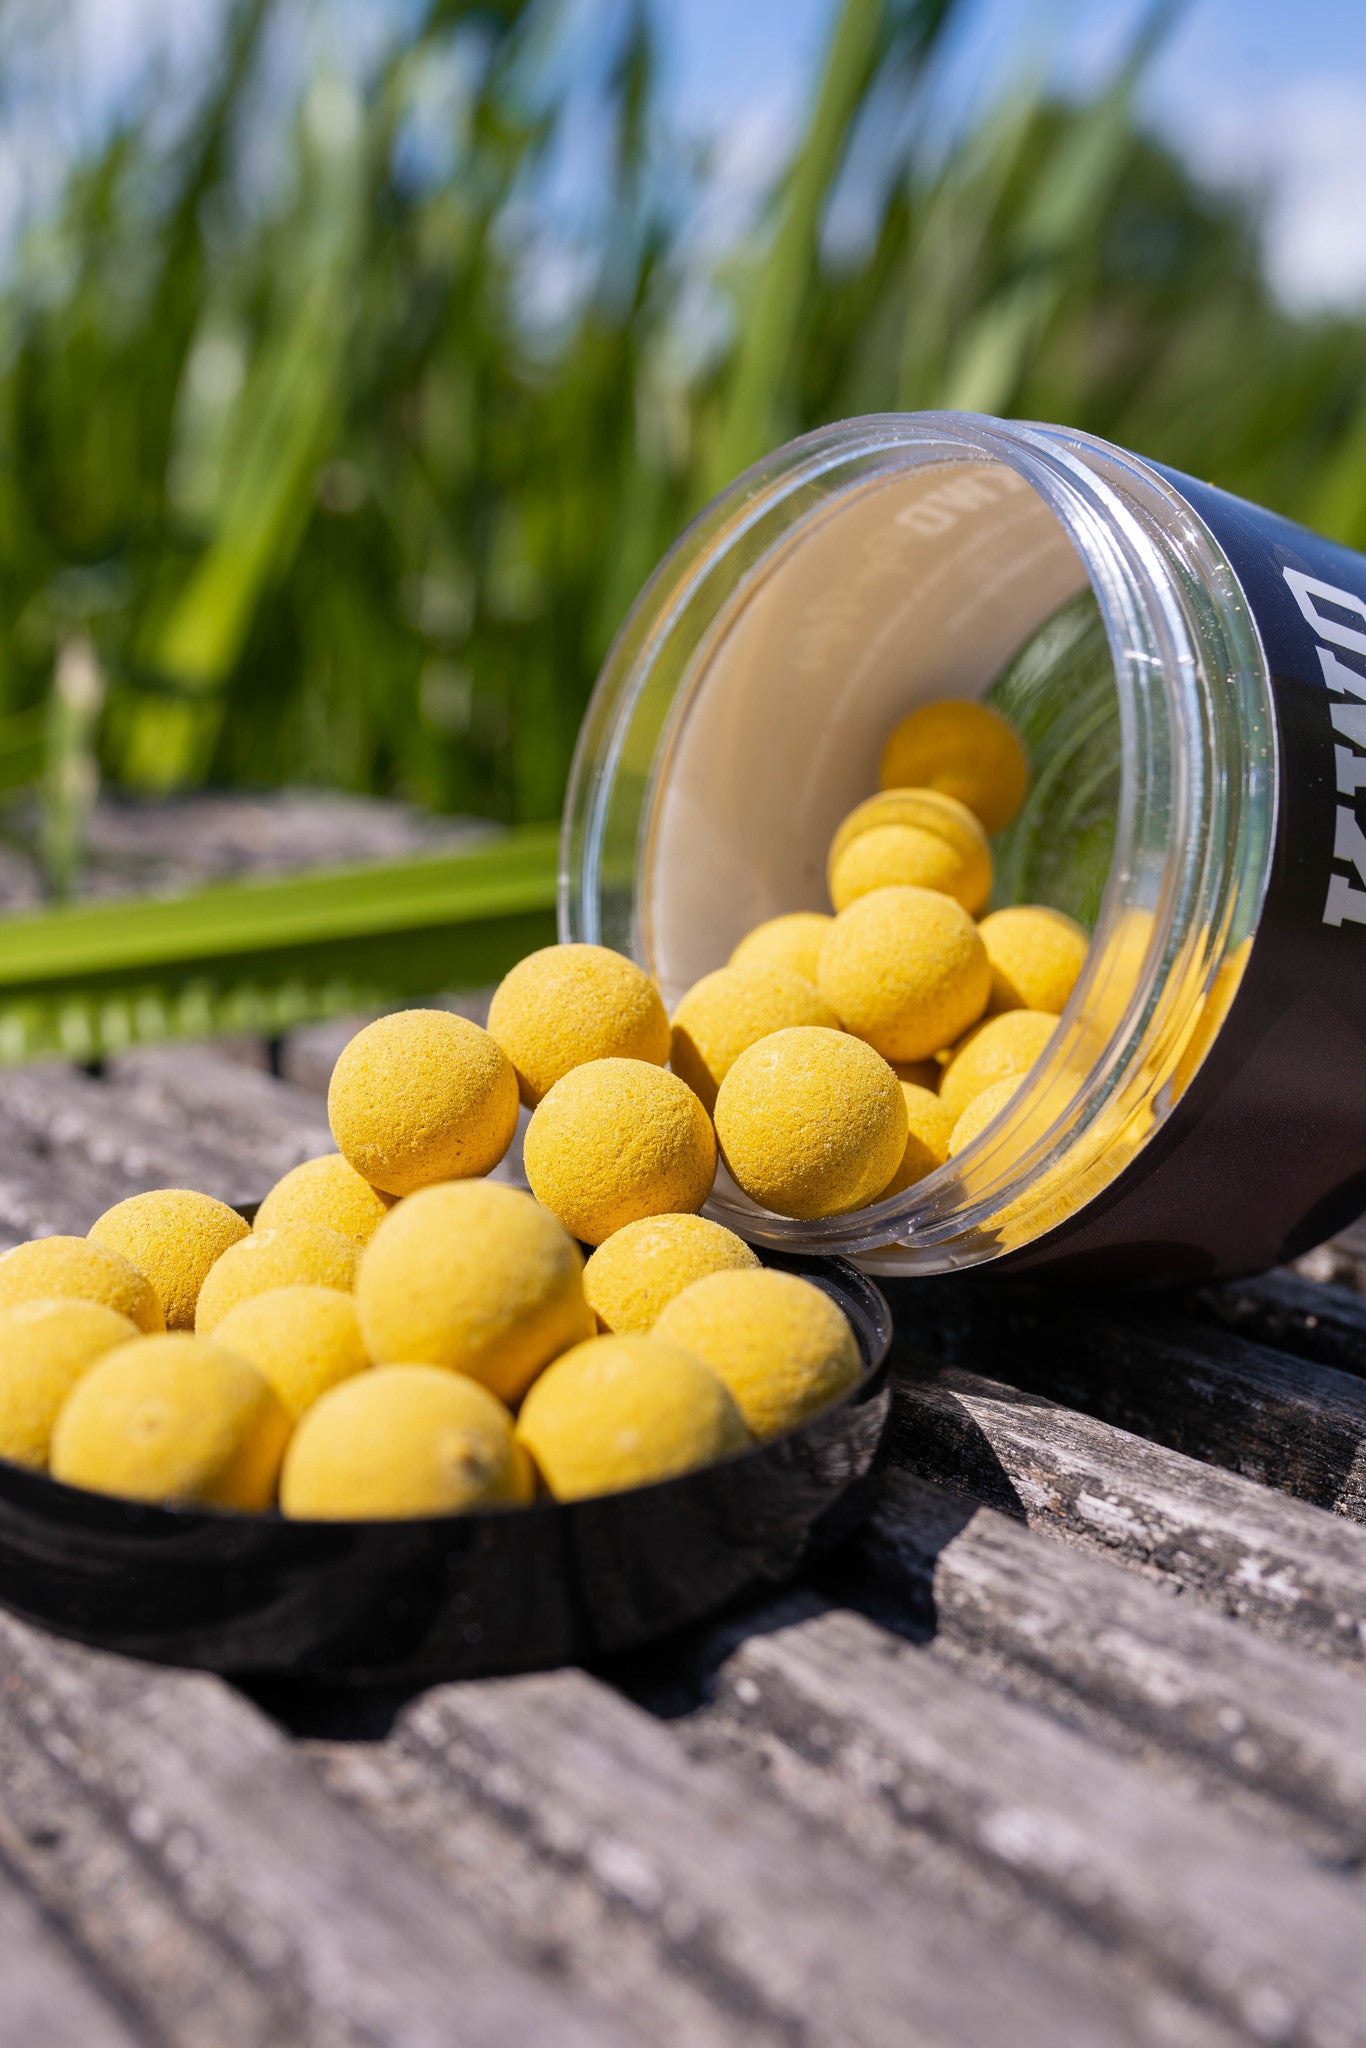 
                  
                    Session Pack - 5KG Squid Specials - Boilies - KWO Shop
                  
                